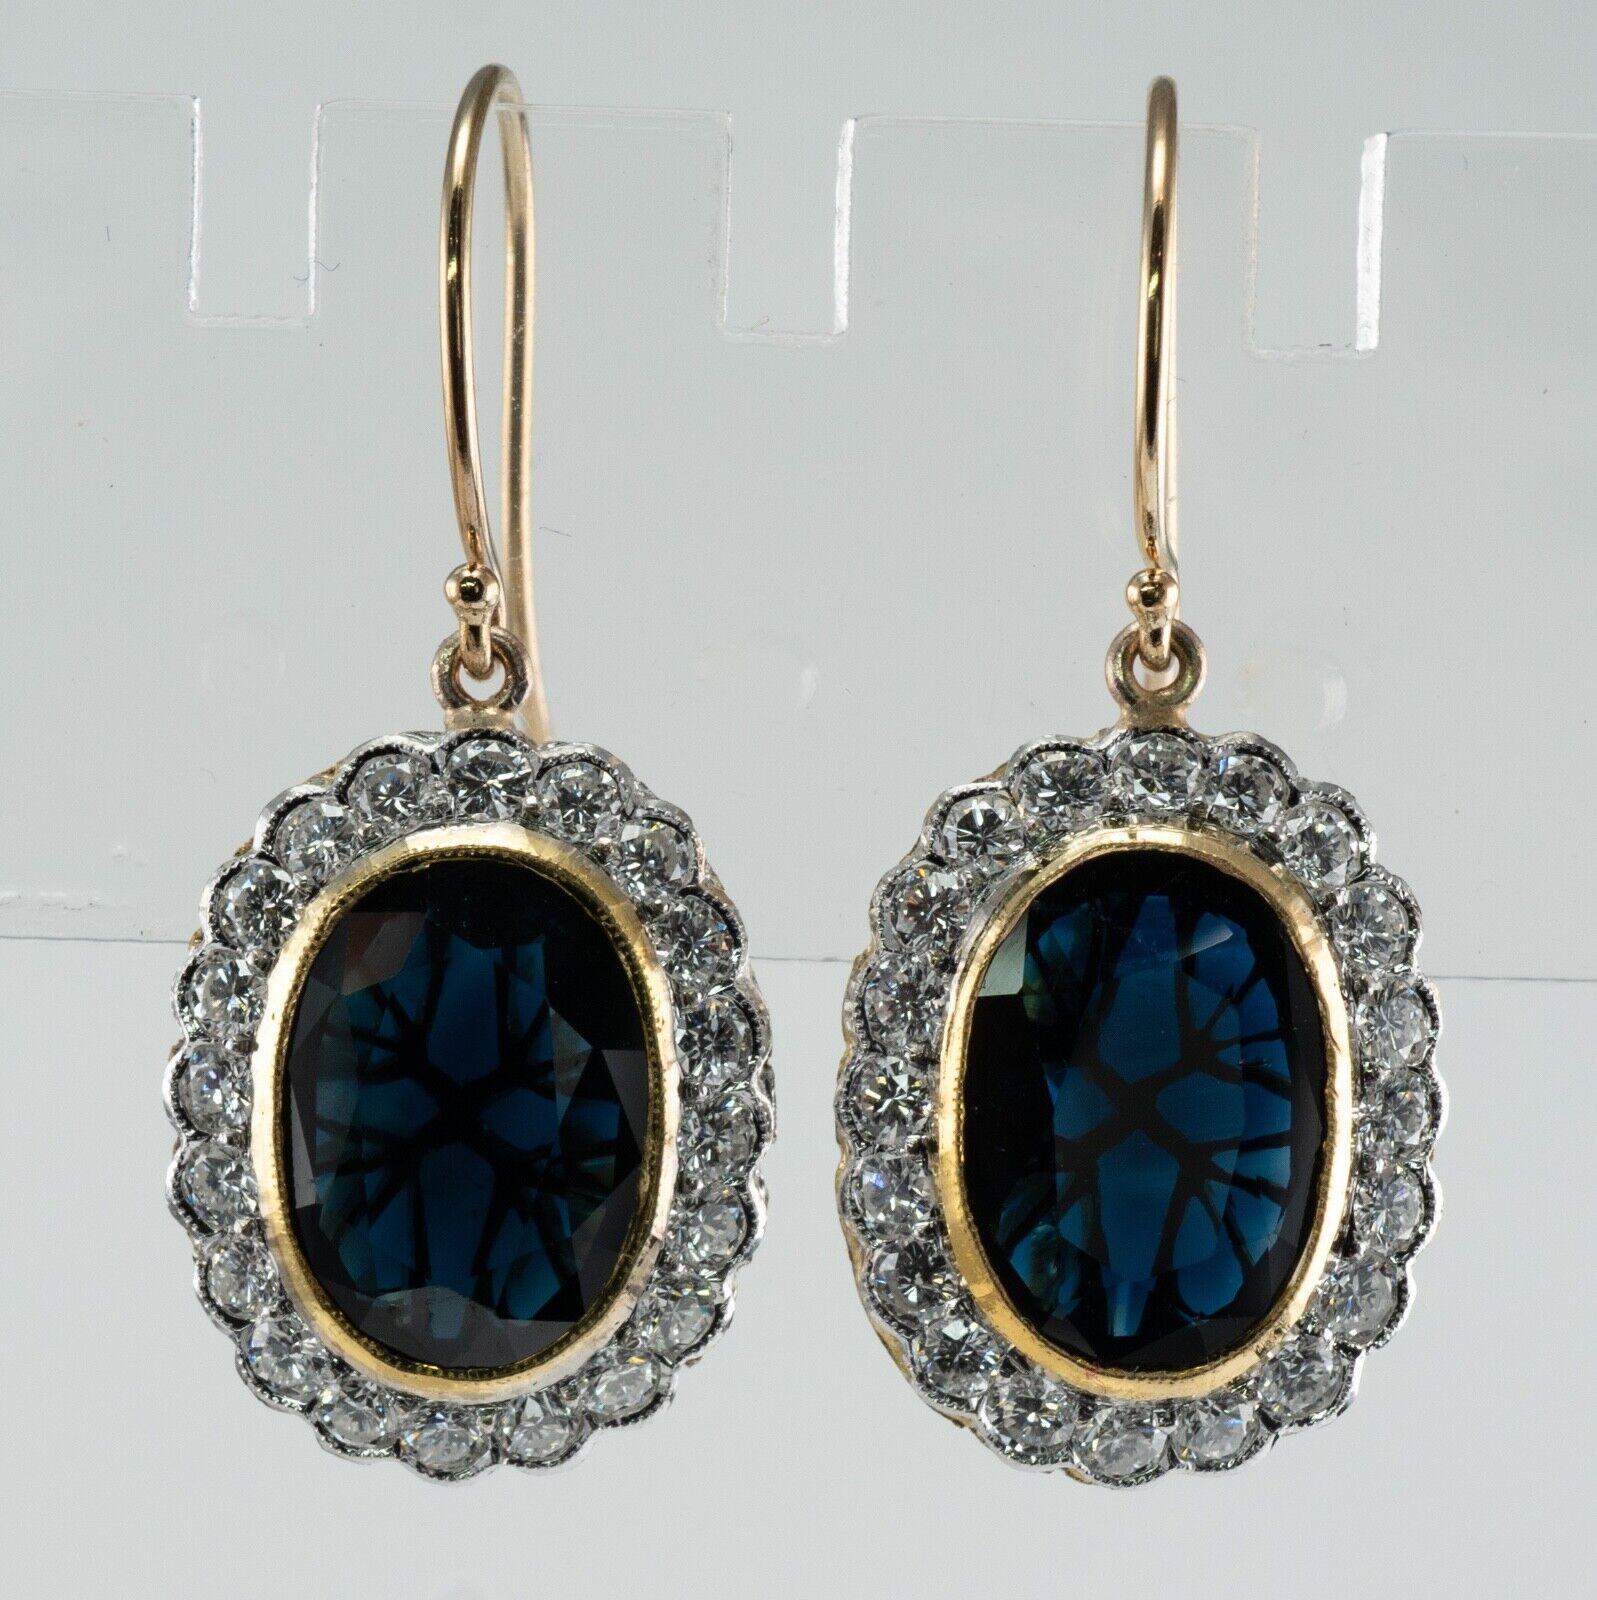 Natural Diamond Sapphire Earrings Drop Dangle Vintage 14K Gold

This vintage pair of earrings is crafted in solid 14K Yellow Gold (stamped on the hook backs).
The center oval cut Sapphires measure 11x9mm totaling 7.60 carats for the pair.
The